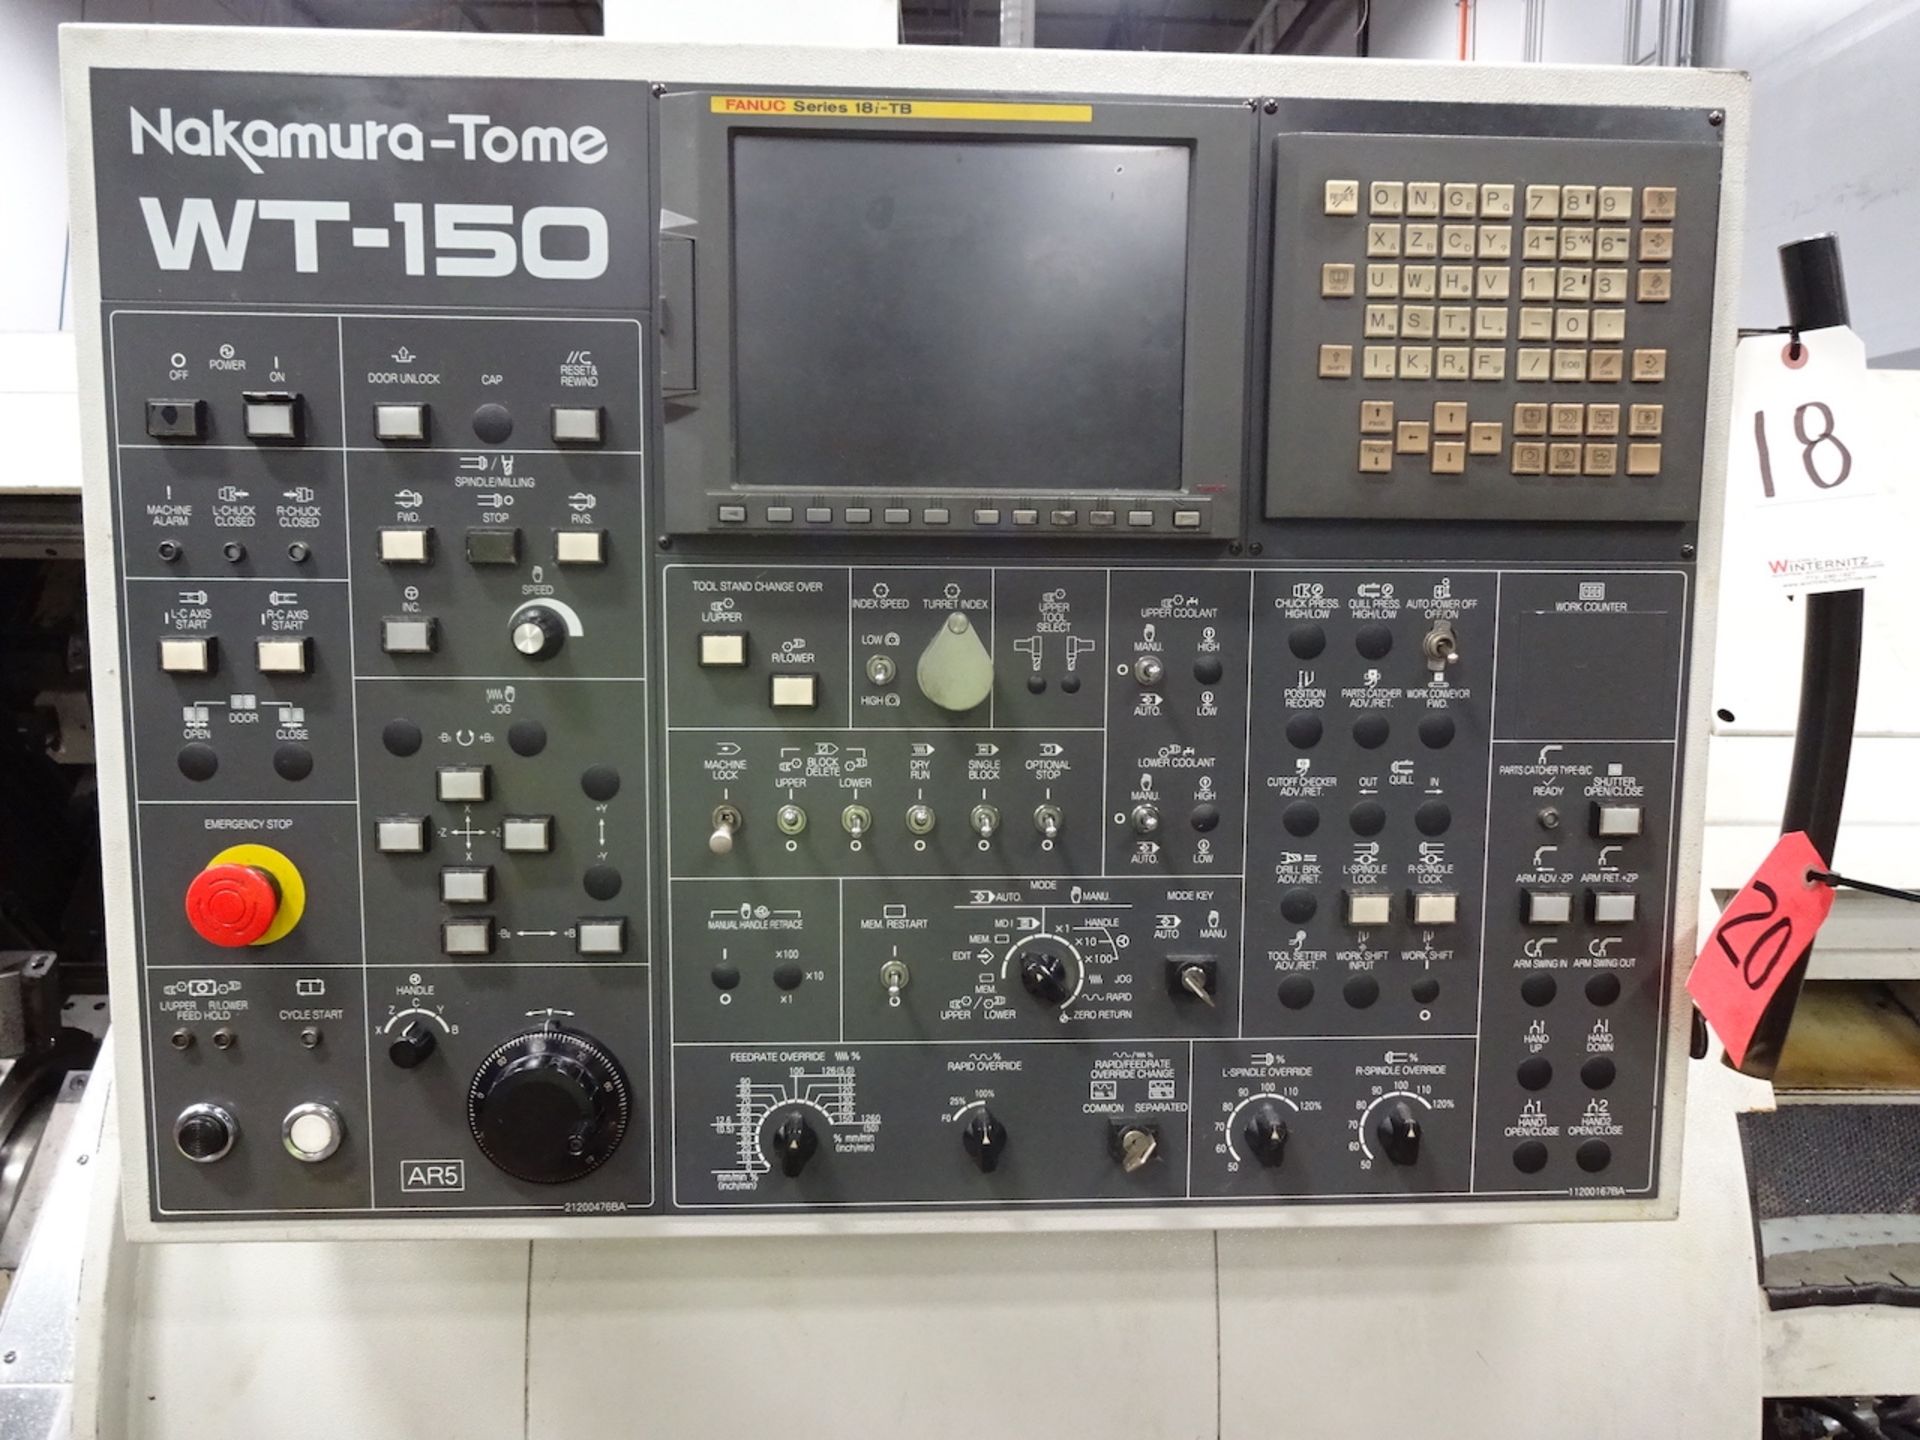 NAKAMURA-TOME MODEL WT-150 CNC TWIN SPINDLE TWIN TURRET TURNING CENTER, S/N M151307, IEMCA MODEL VIP - Image 3 of 7